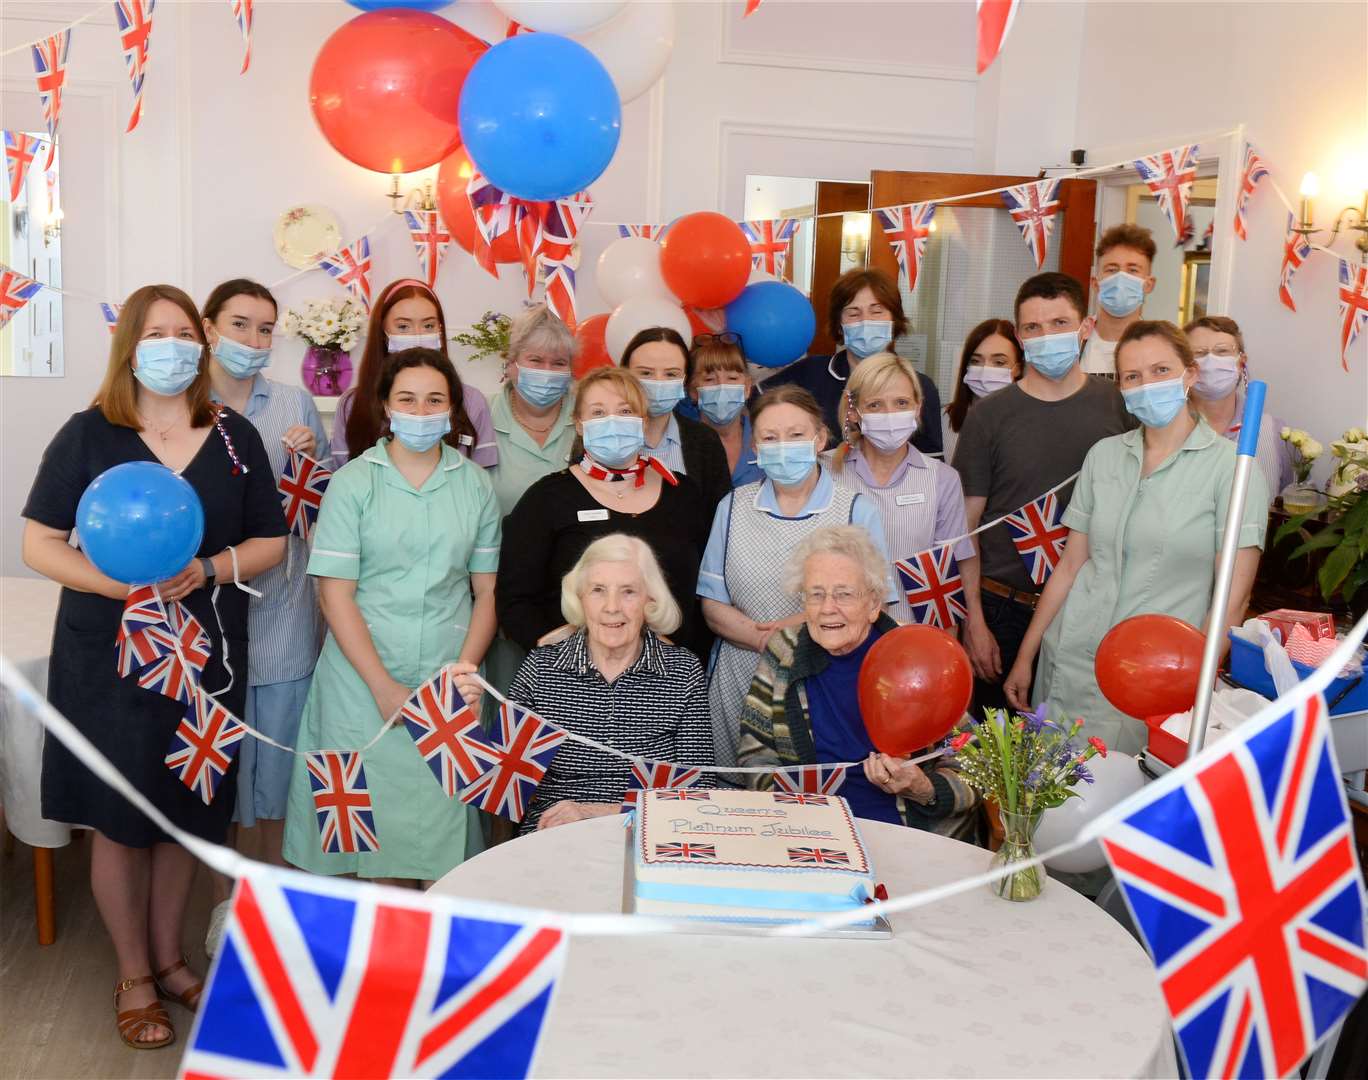 The staff at Ballifeary Care Home and residents Margaret Mackenzie and Chrissie Smart get into the party mood for the Queen's Platinum Jubilee.